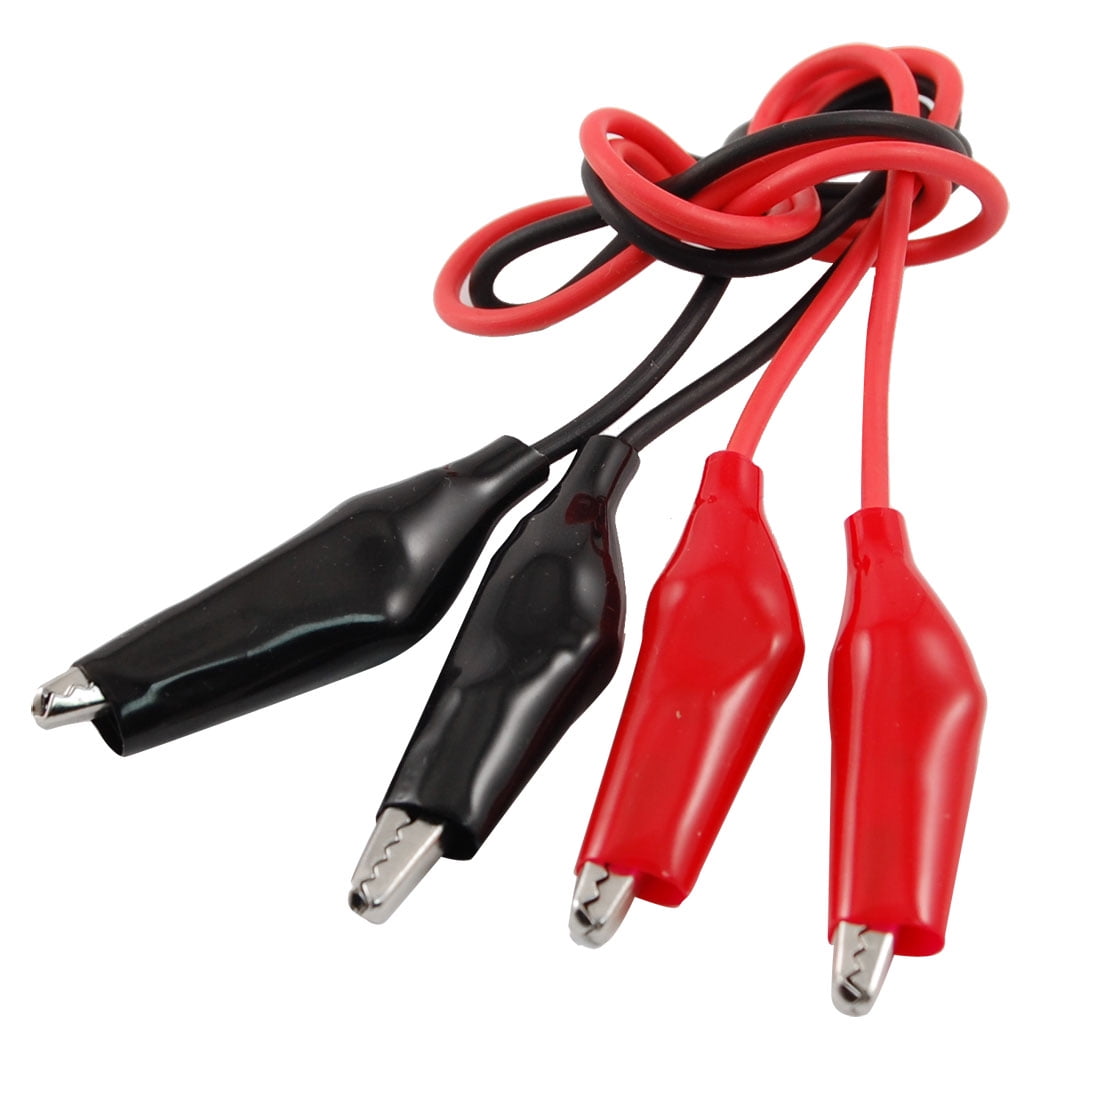 New 2X Multimeter Test Lead Cable Power Supply Alligator Crocodile Clip Tester 